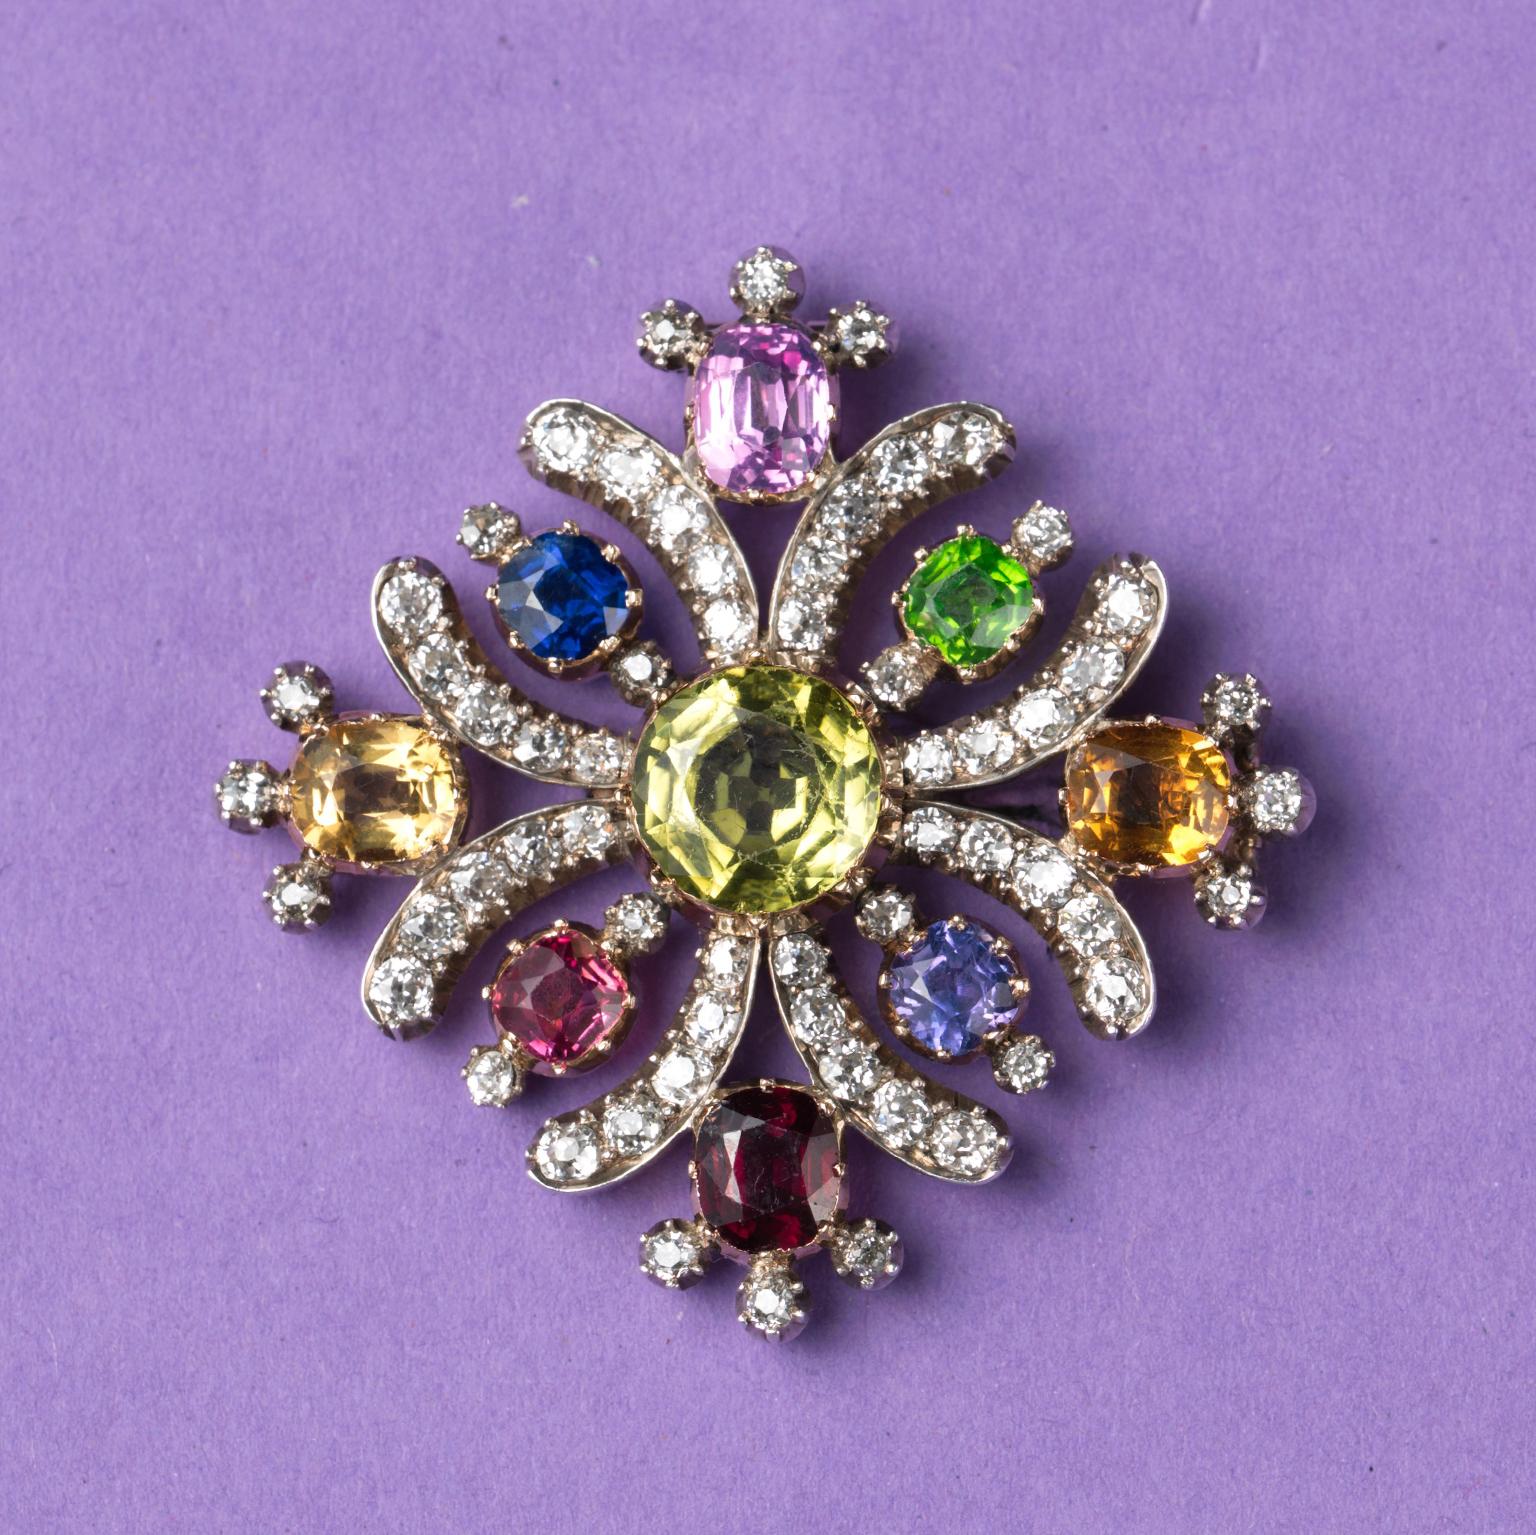 A Georgian brooch in the shape of a Maltese cross in silver with gold backing and open-set gemstones (peridot, sapphire, citrine, demantoid and almandine garnet, and spinel); the geometric curved lines are set with old-cut diamonds. A double usage,